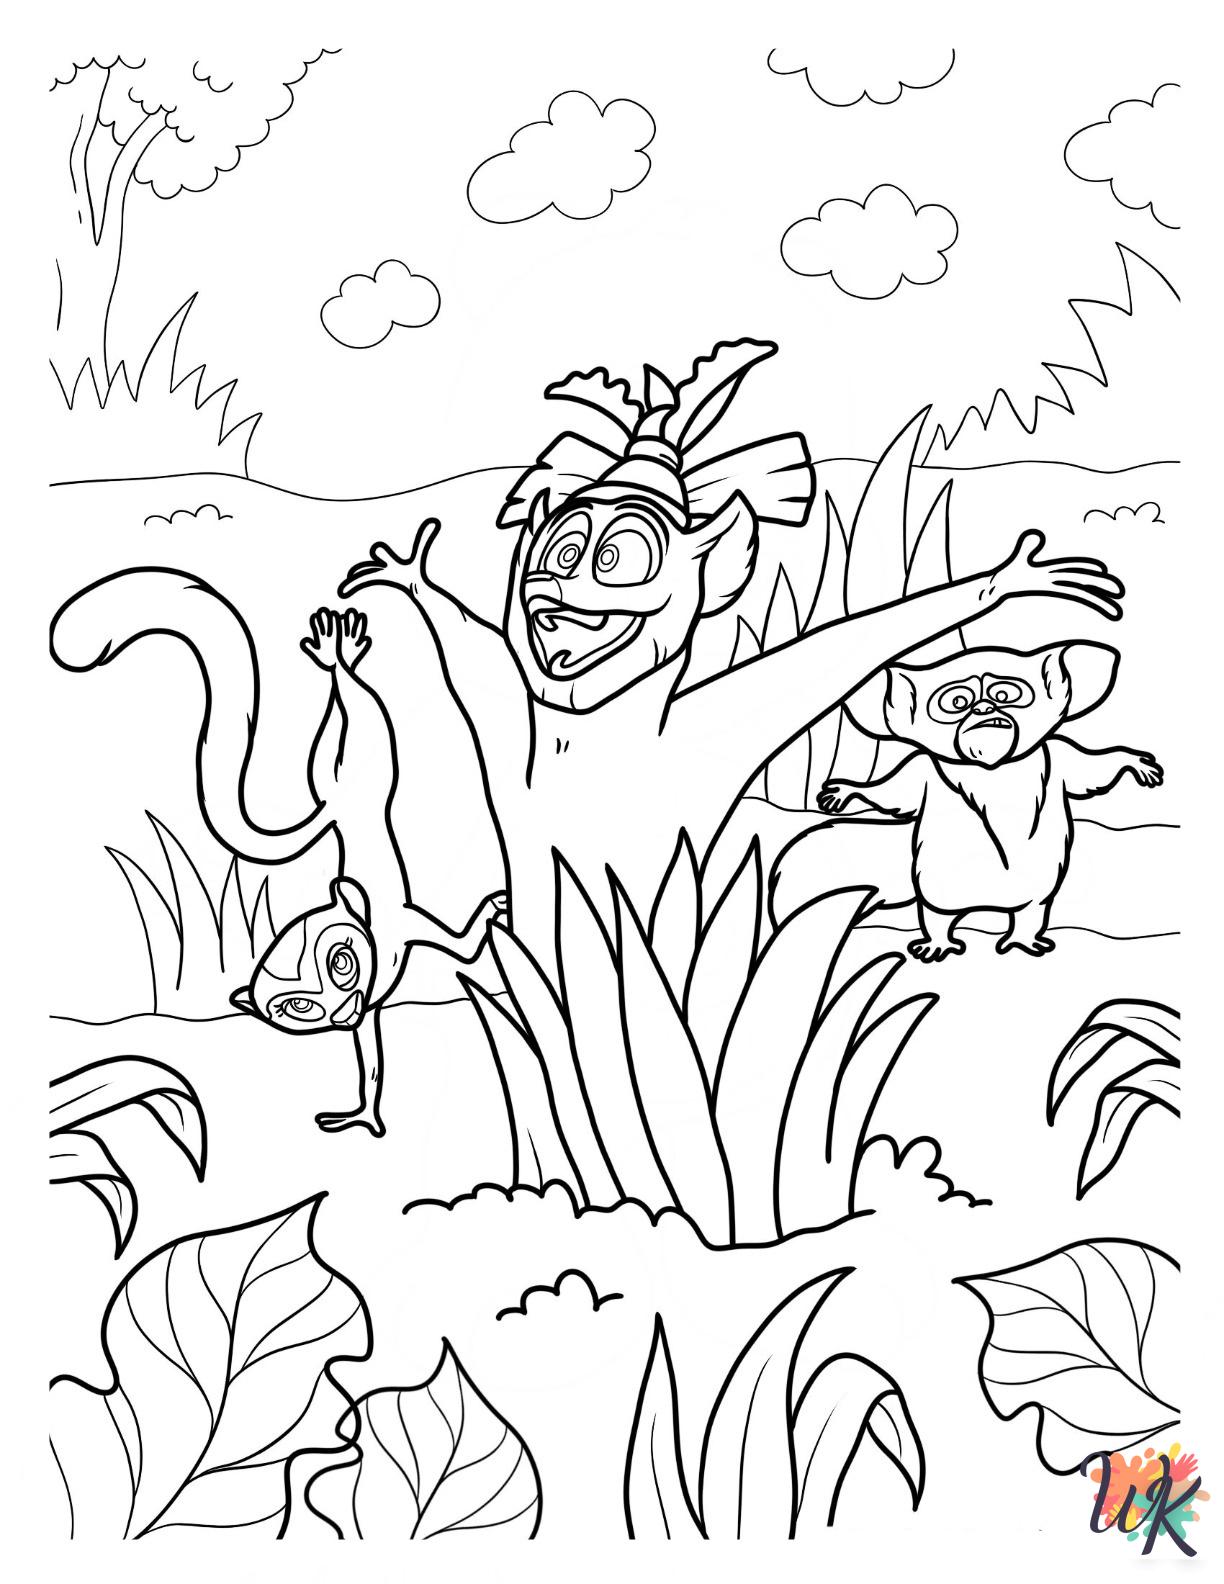 Madagascar coloring pages for adults easy